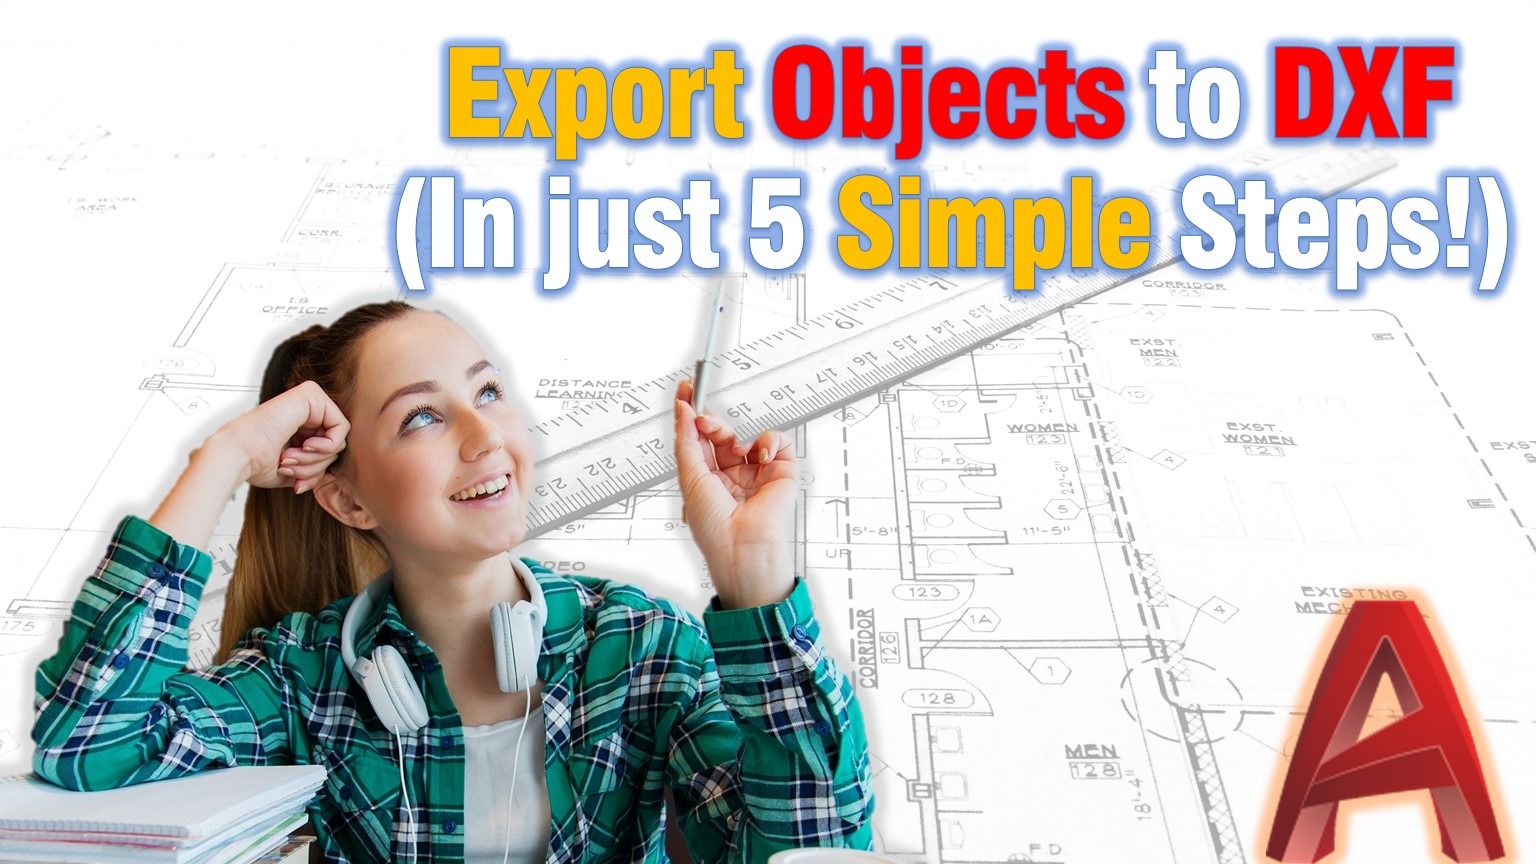 Learn how to Export objects to DXF in AutoCAD!